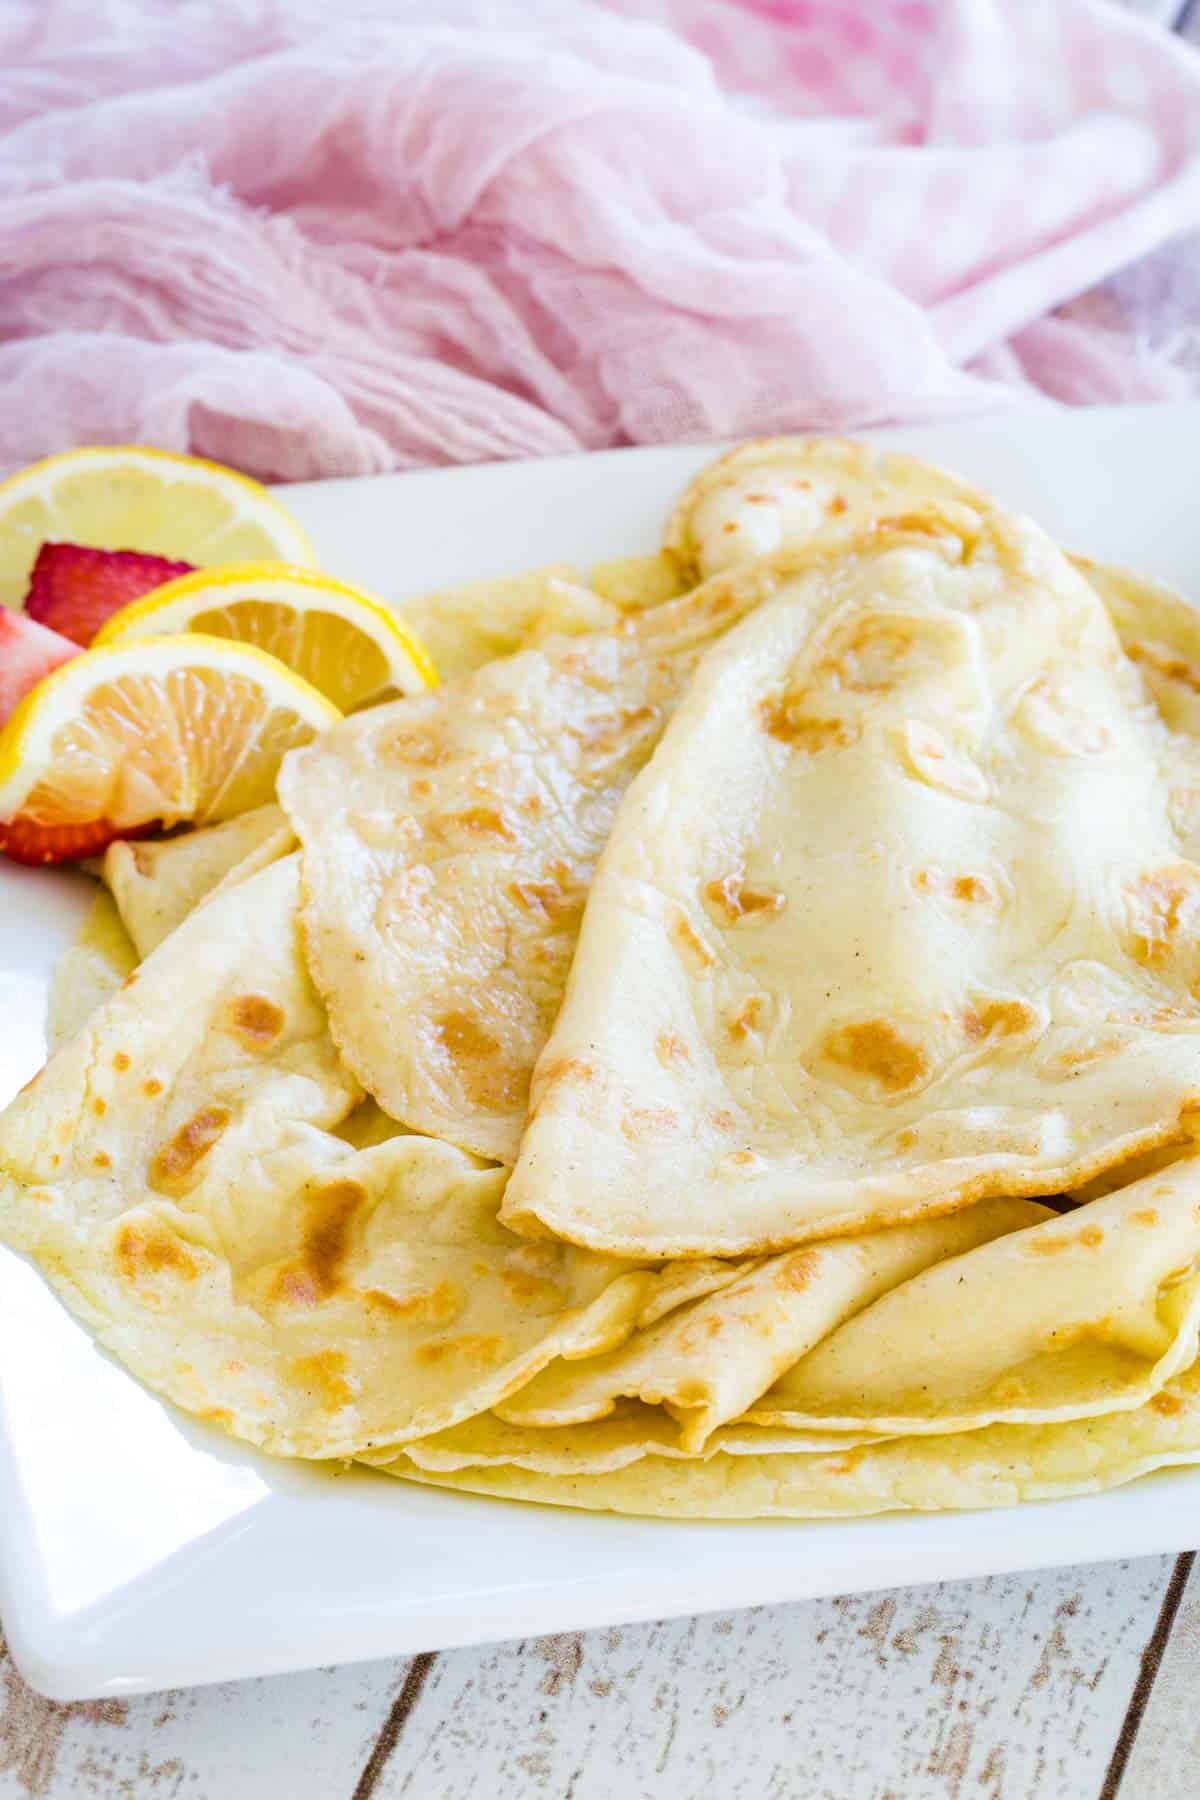 Crepes piled up on a white okate with soime strawberry and lemon slices.